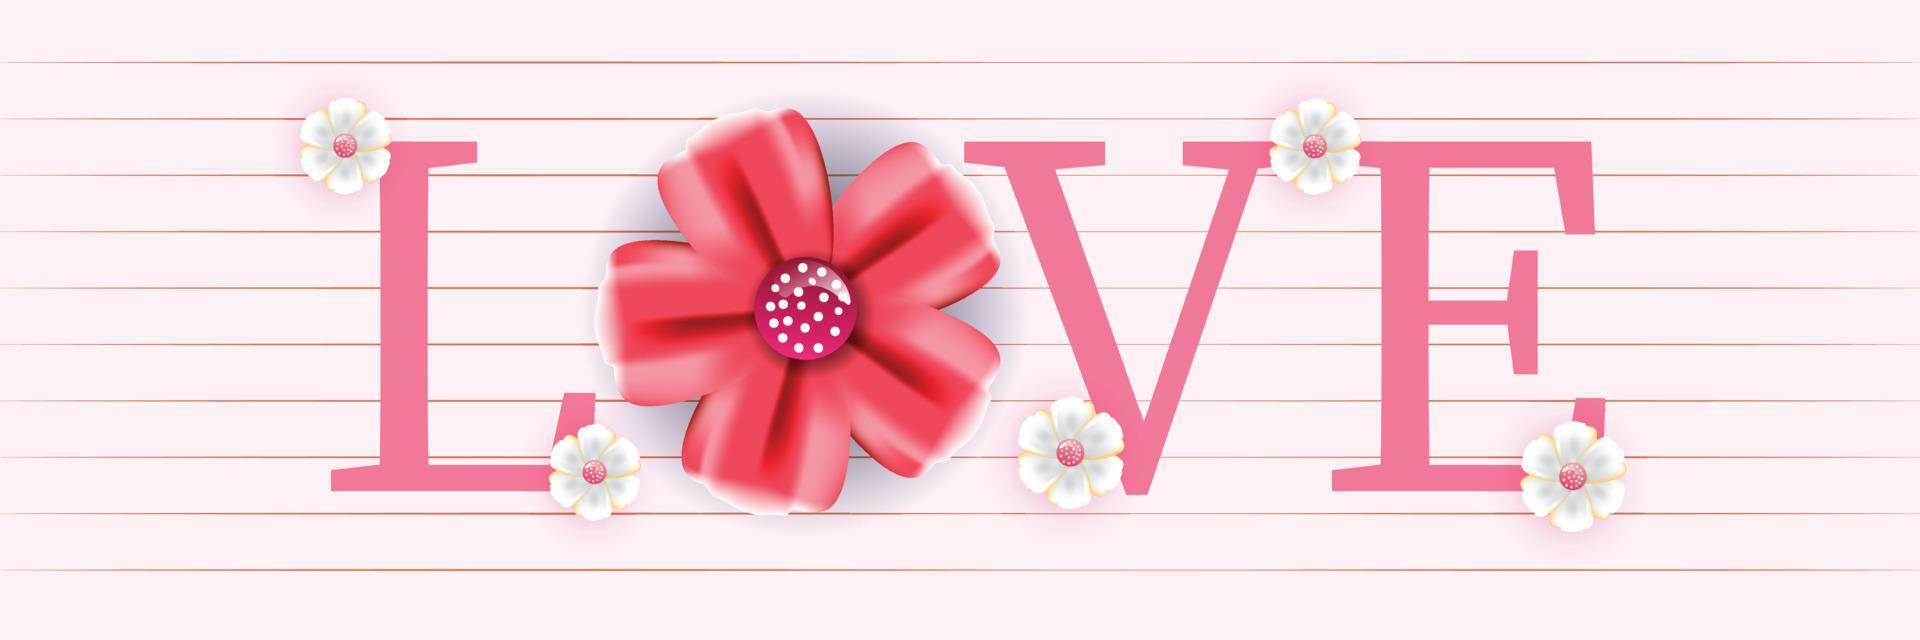 Love banner with flowers. Template for banners, cards, advertisements, posters. For Valentine's Day and Mother's day. Vector illustration.